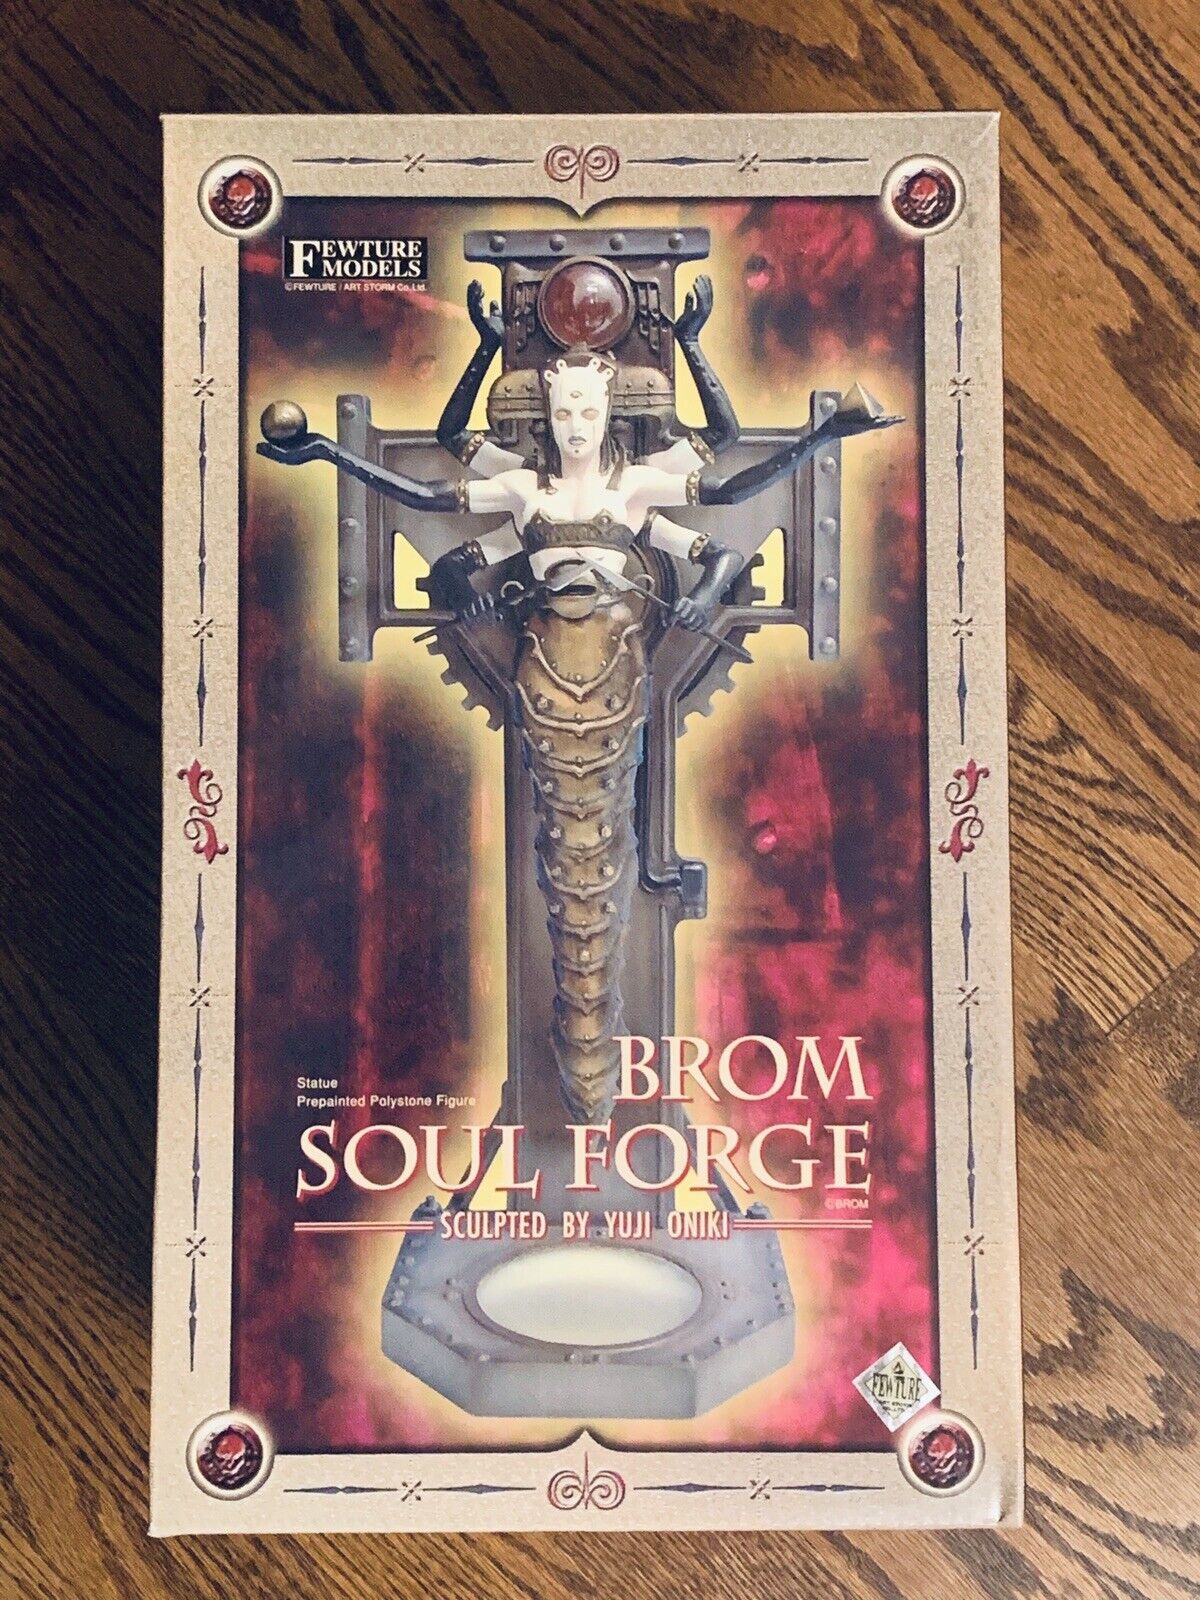 BROM SOUL FORGE STATUE WITH SIGNED BROM ART PRINT